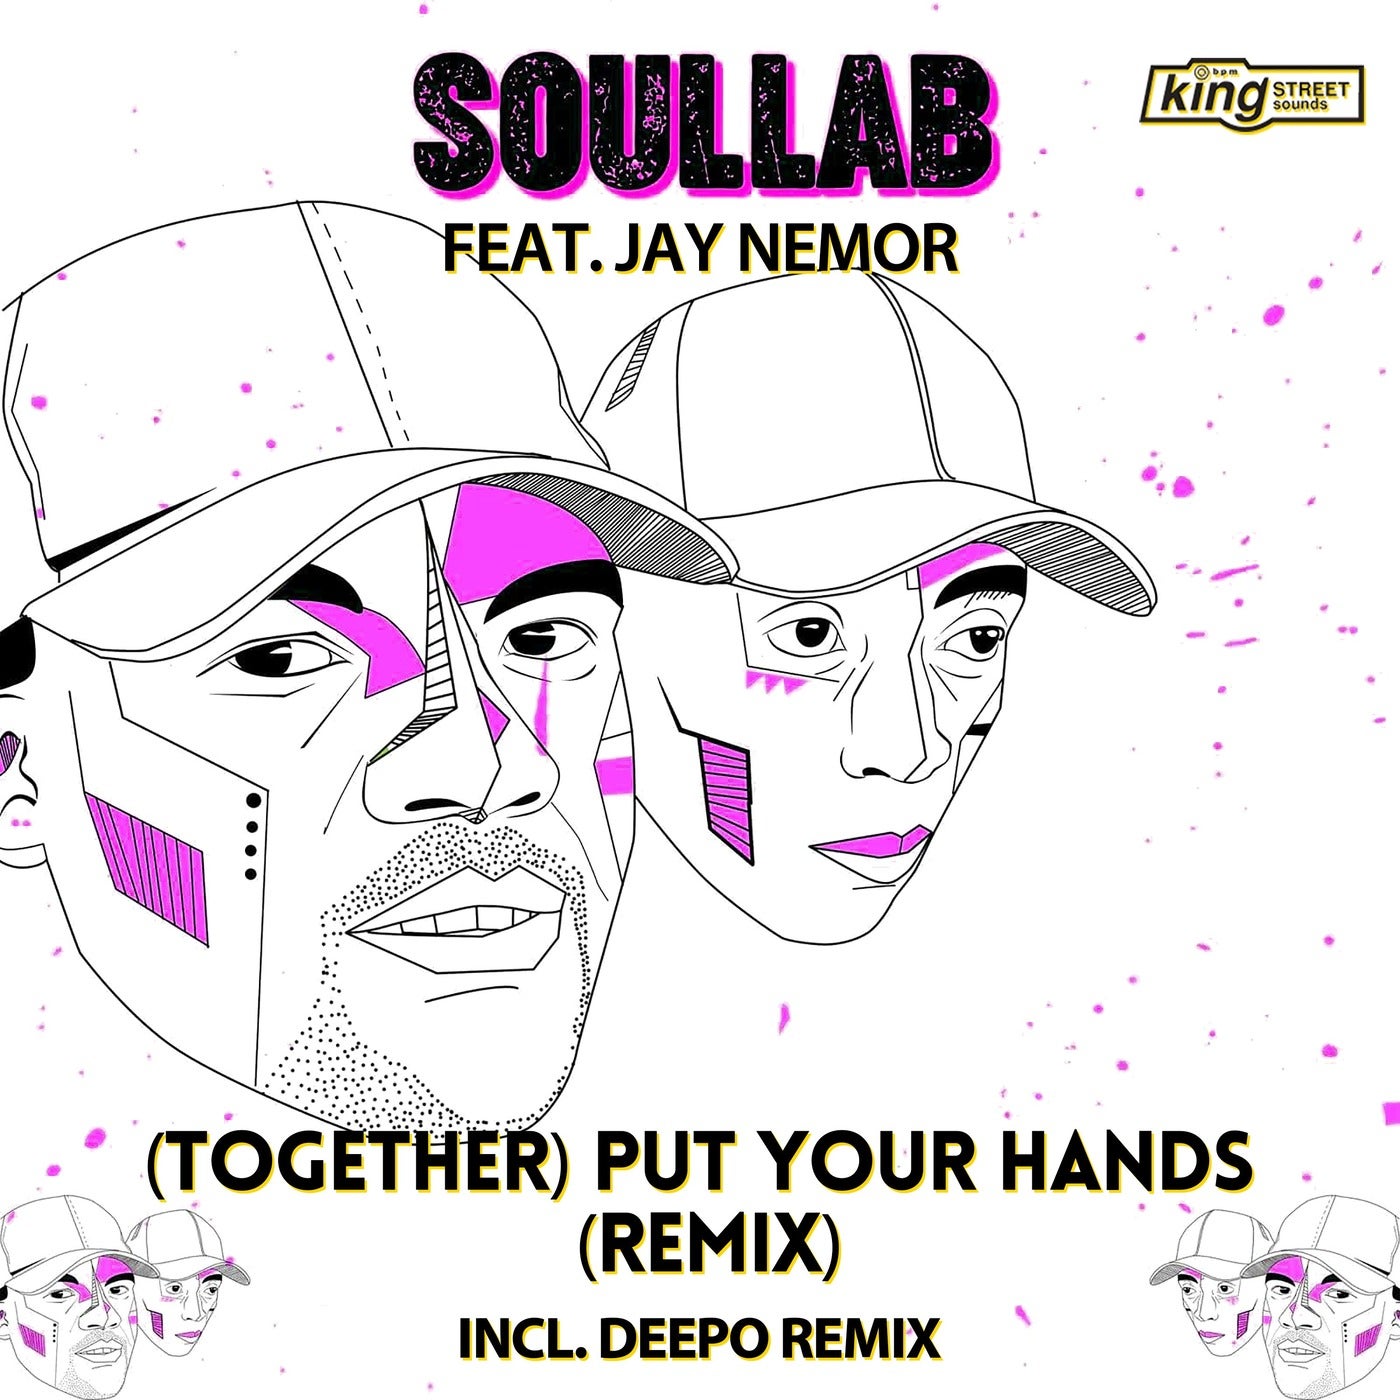 (Together) Put Your Hands (Remix)